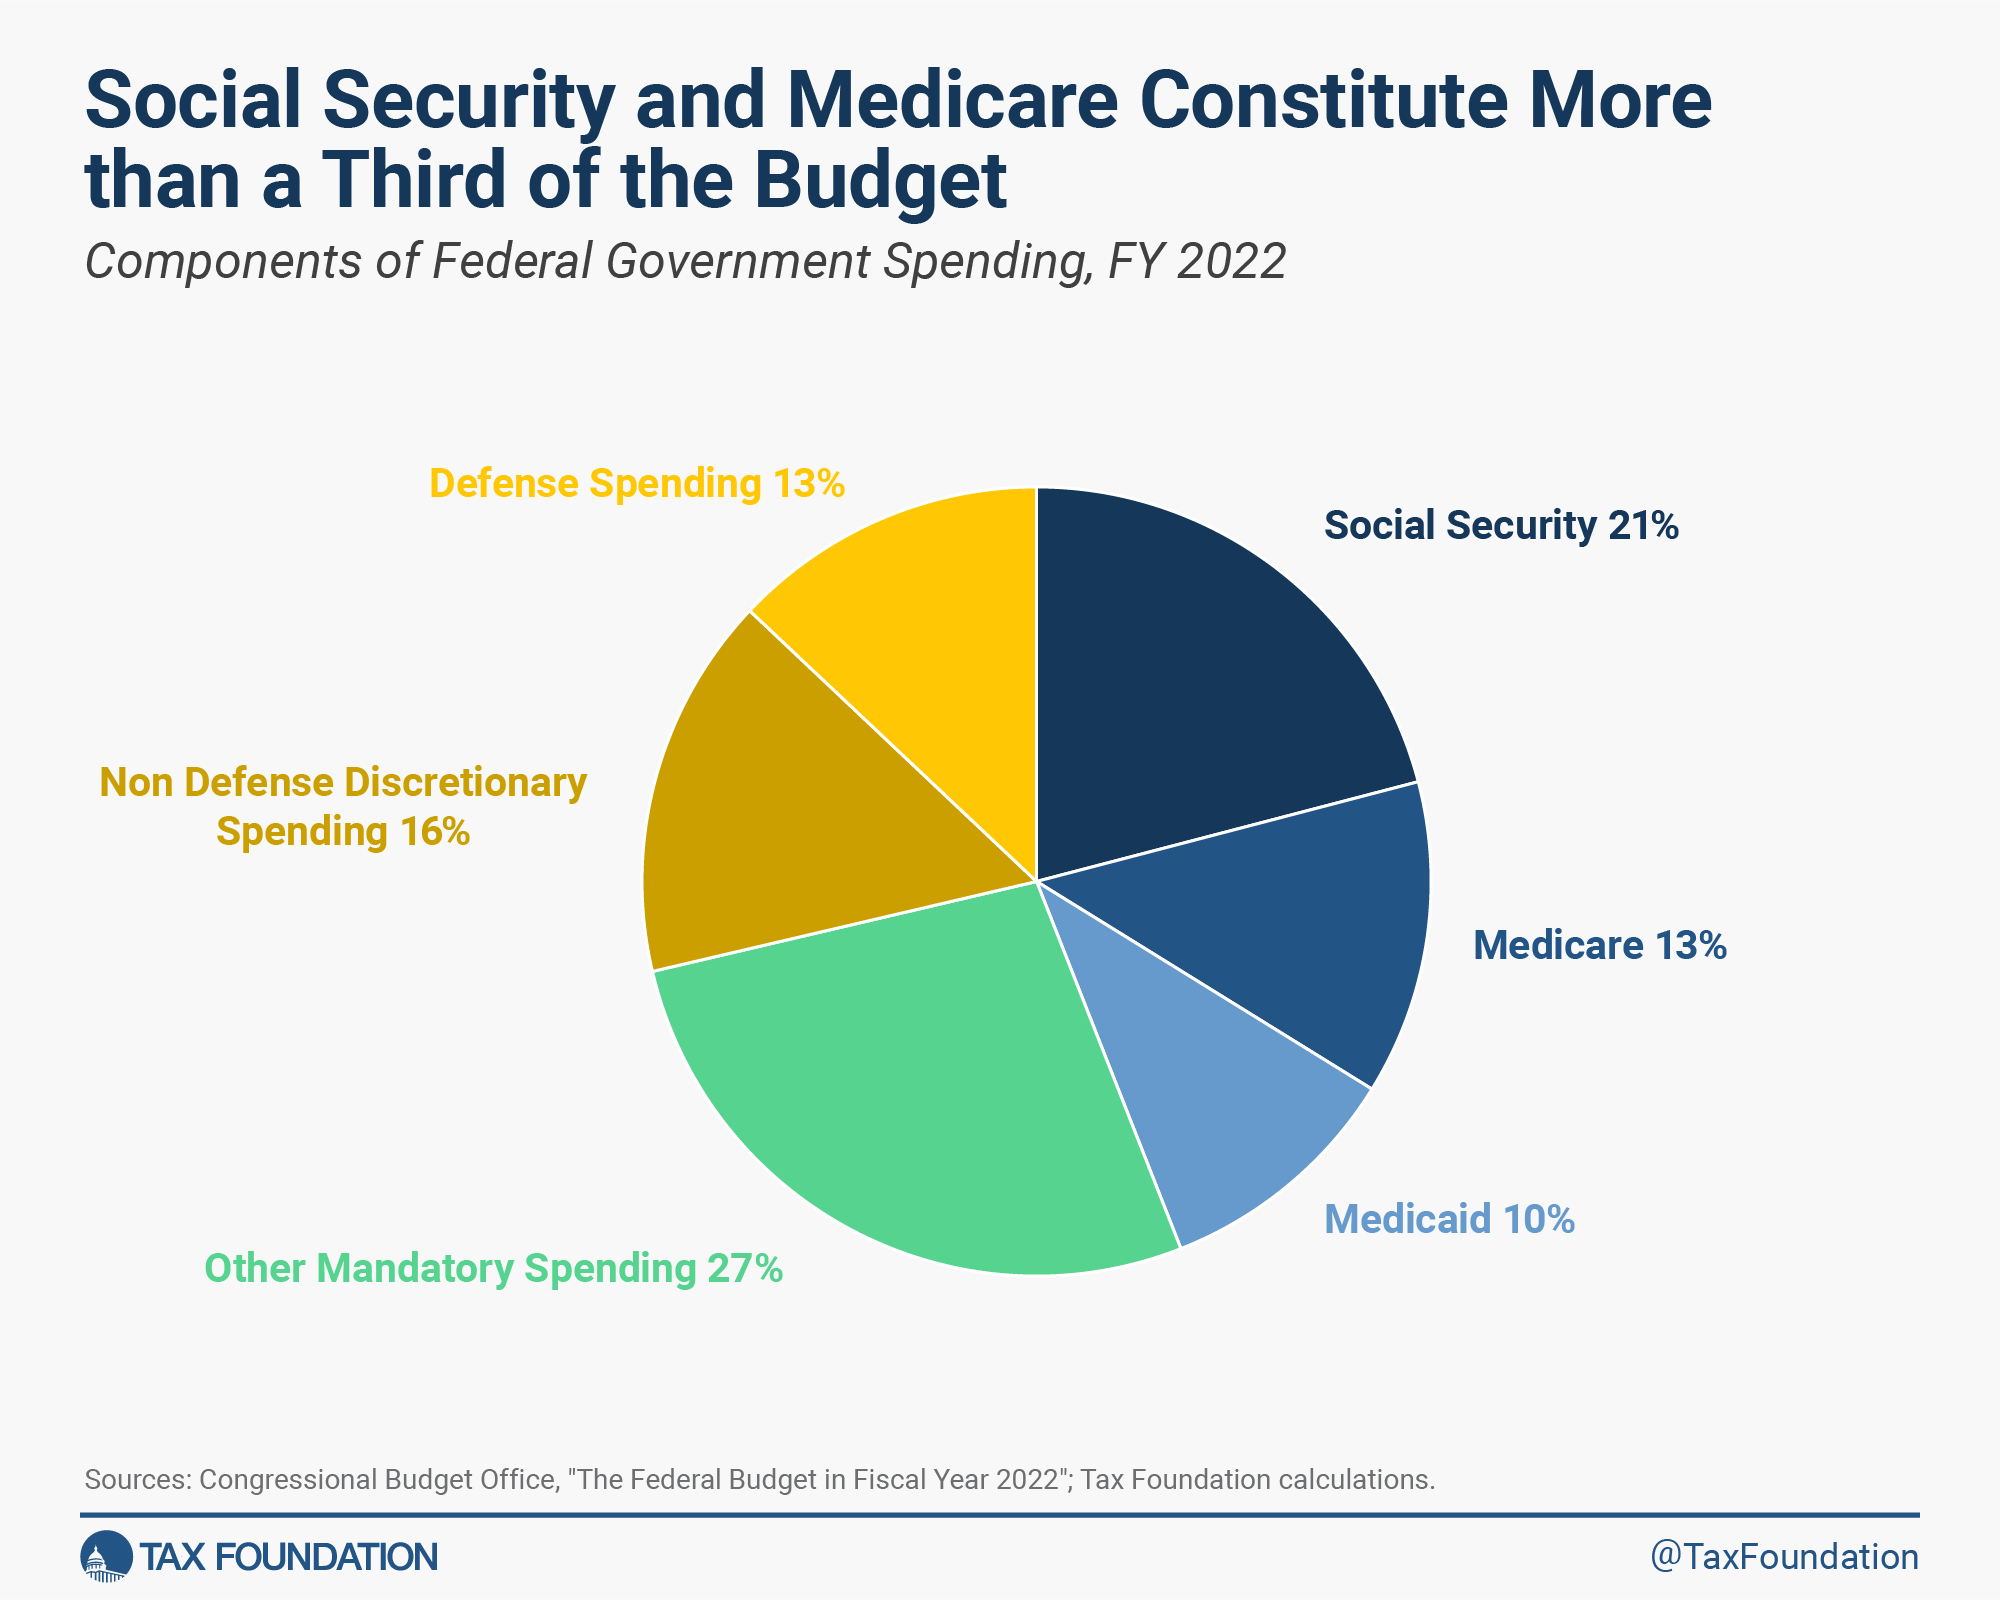 Social Security and Medicare constitute more than a third of the US federal budget